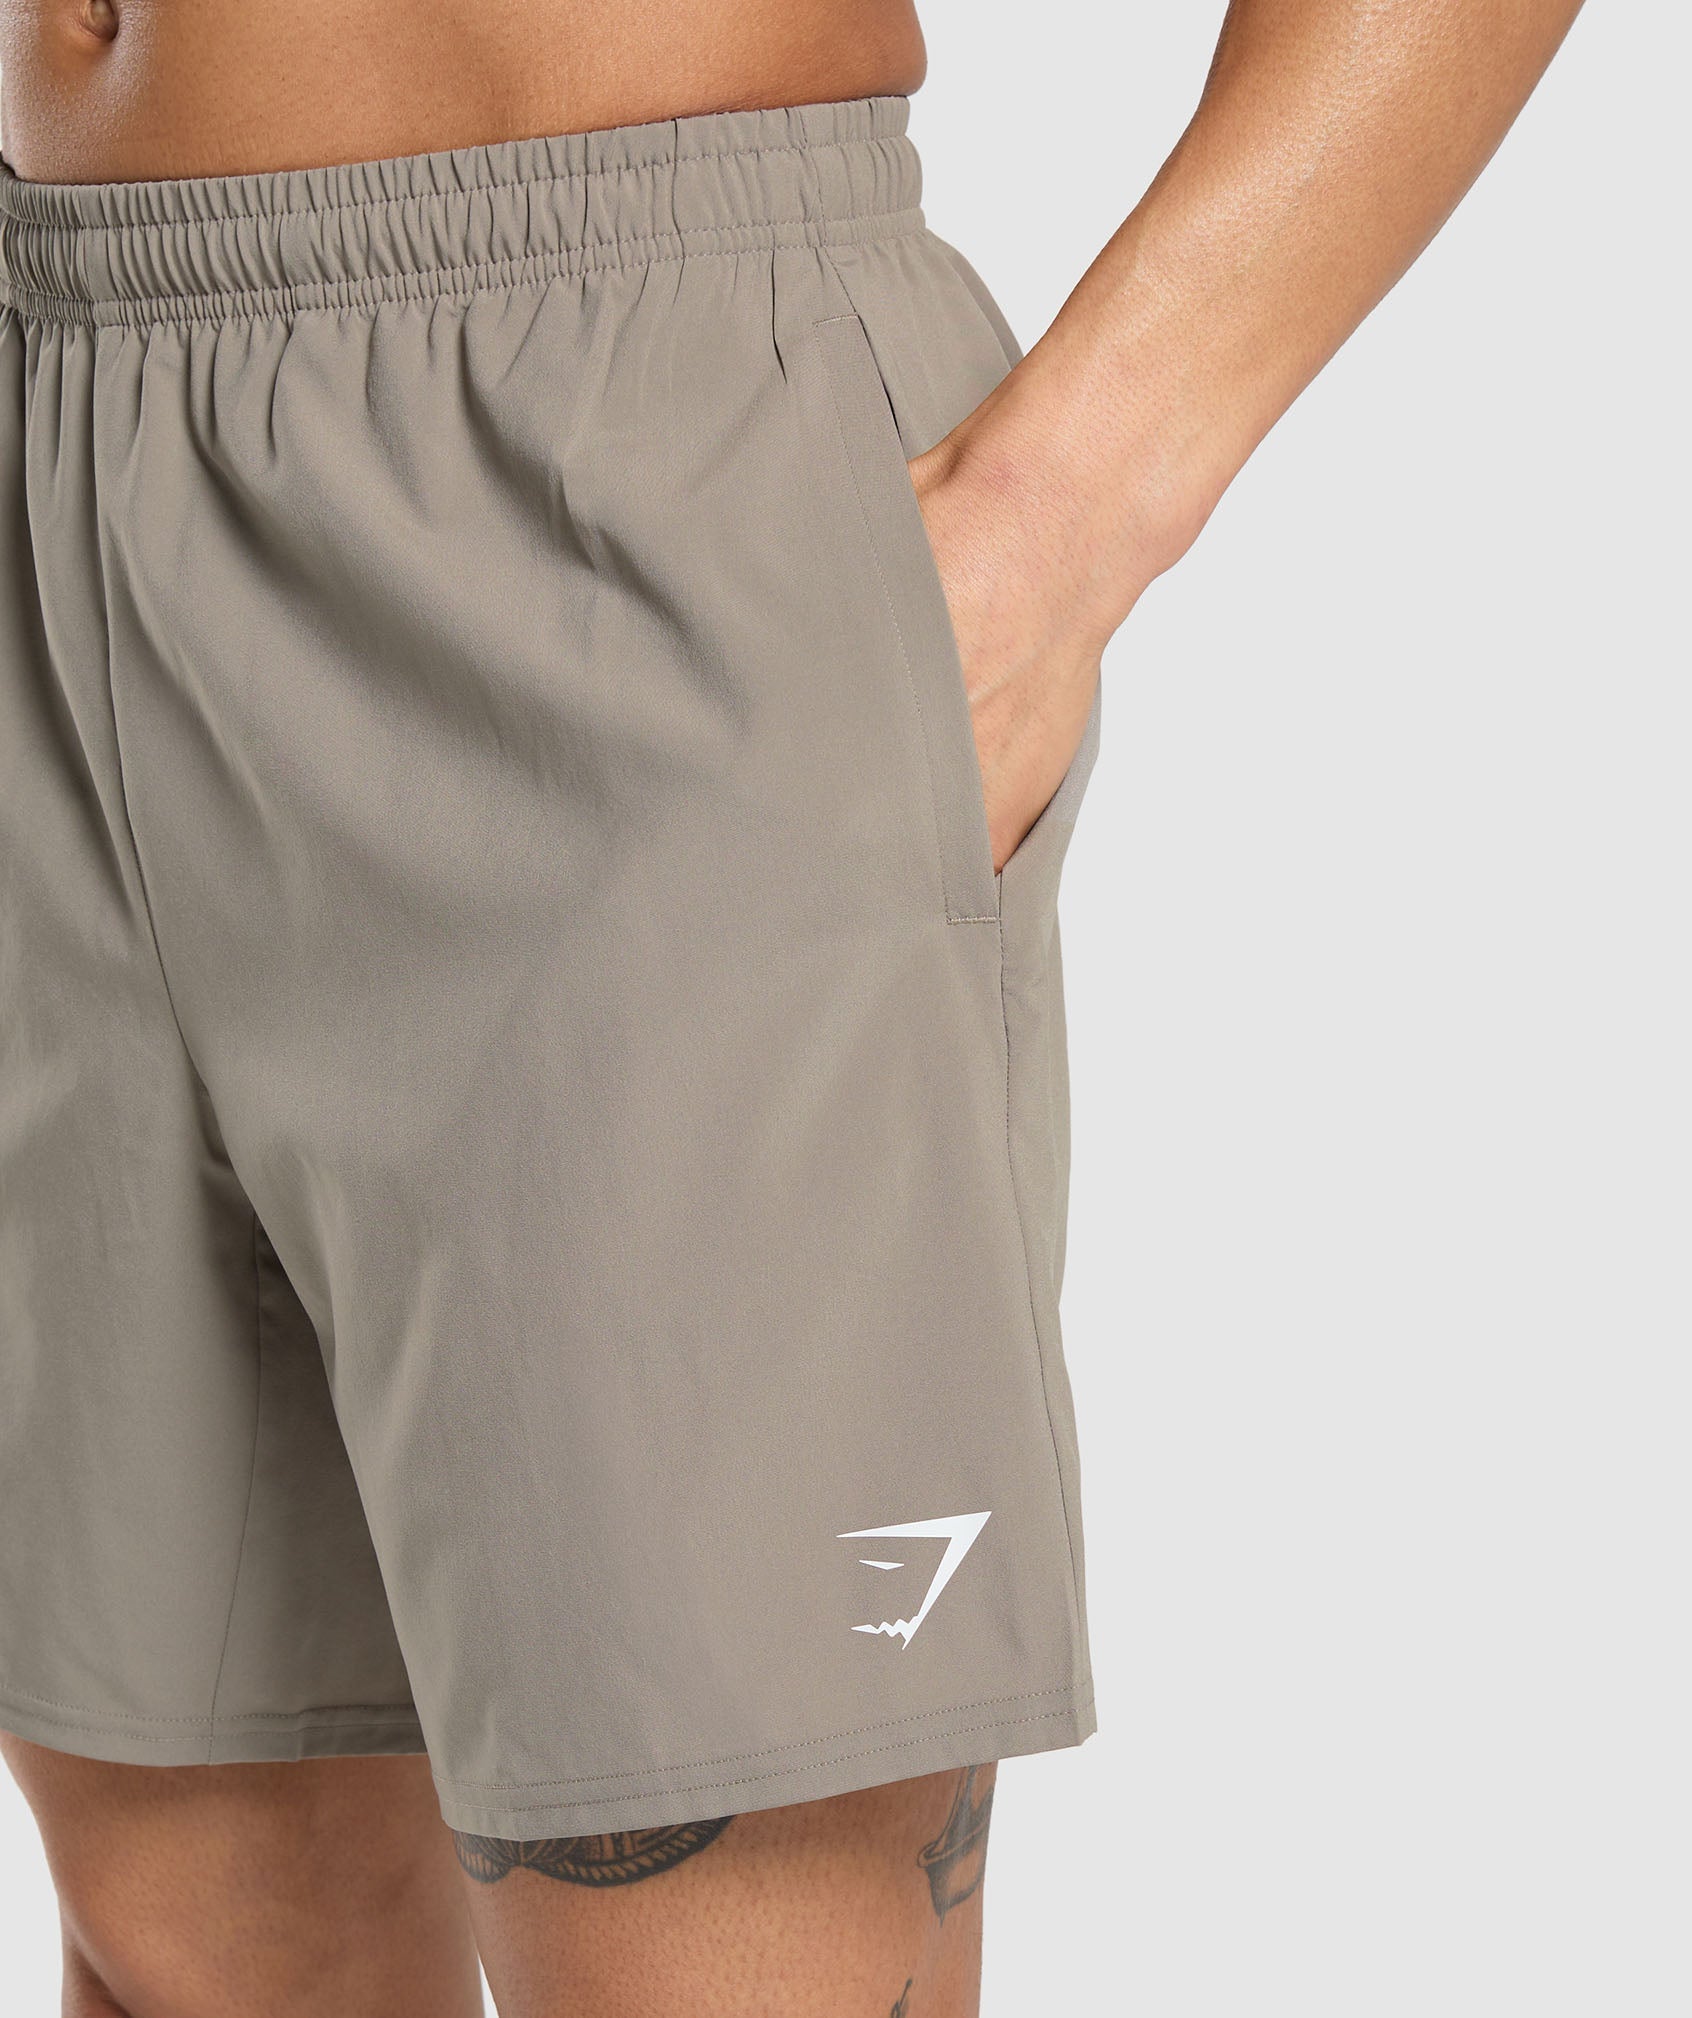 Arrival 7" Shorts in Linen Brown - view 6